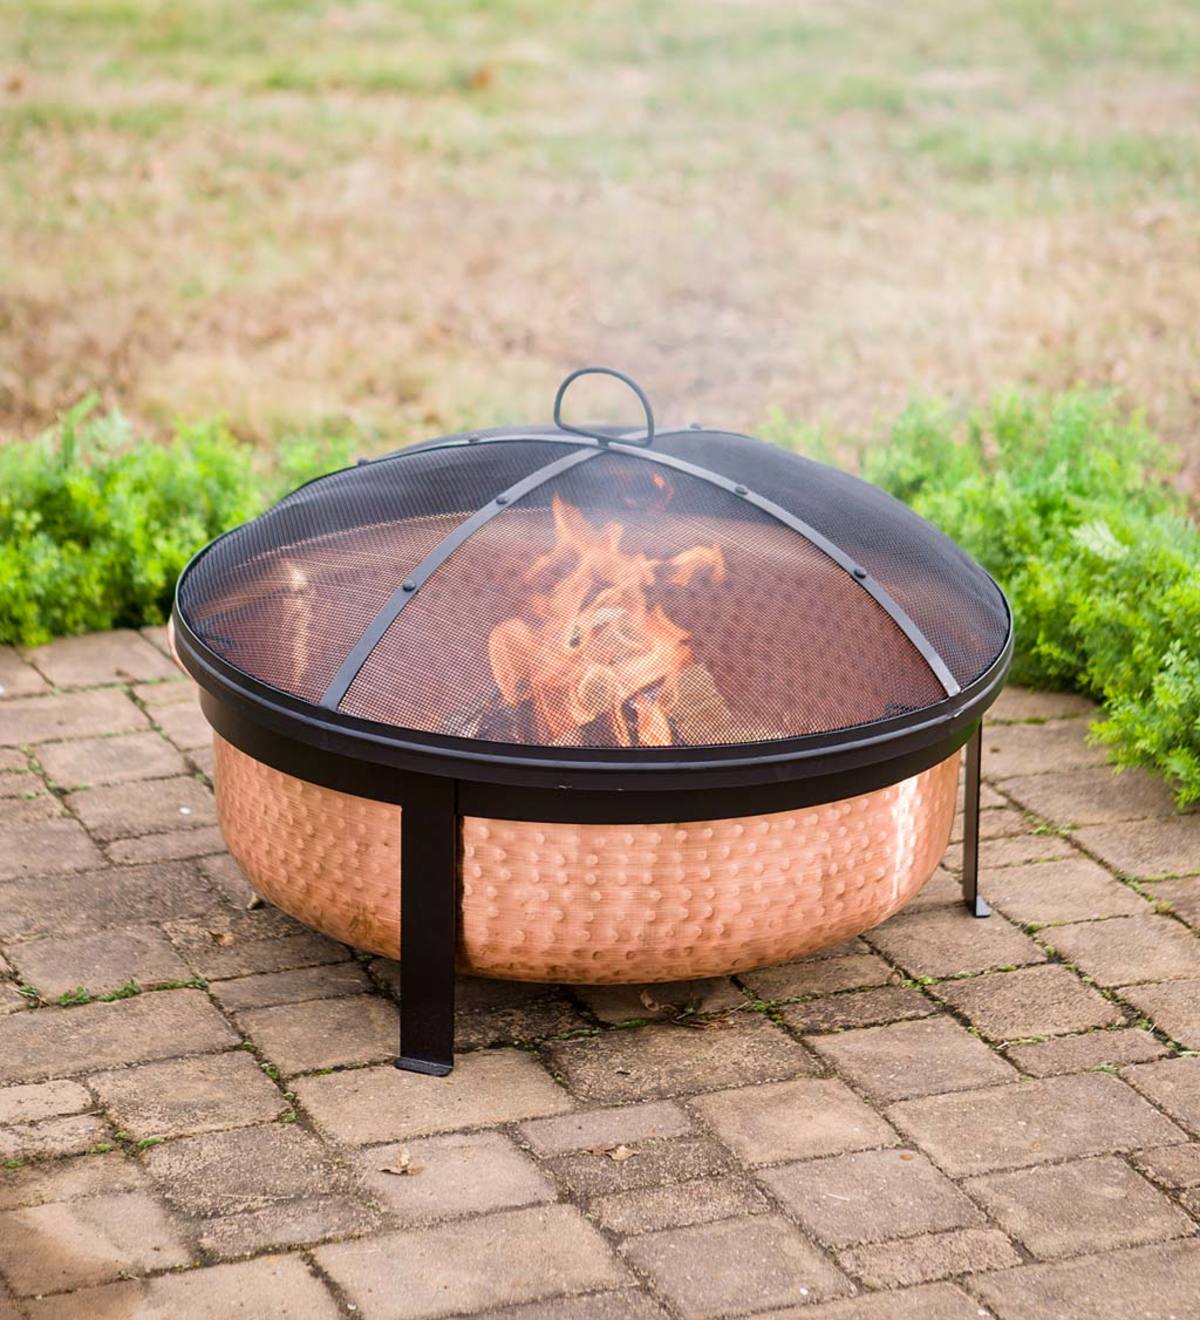 Better Homes & Gardens Wood Burning Copper Fire Pit, 30-inch diameter and 22-inch Height - image 1 of 9